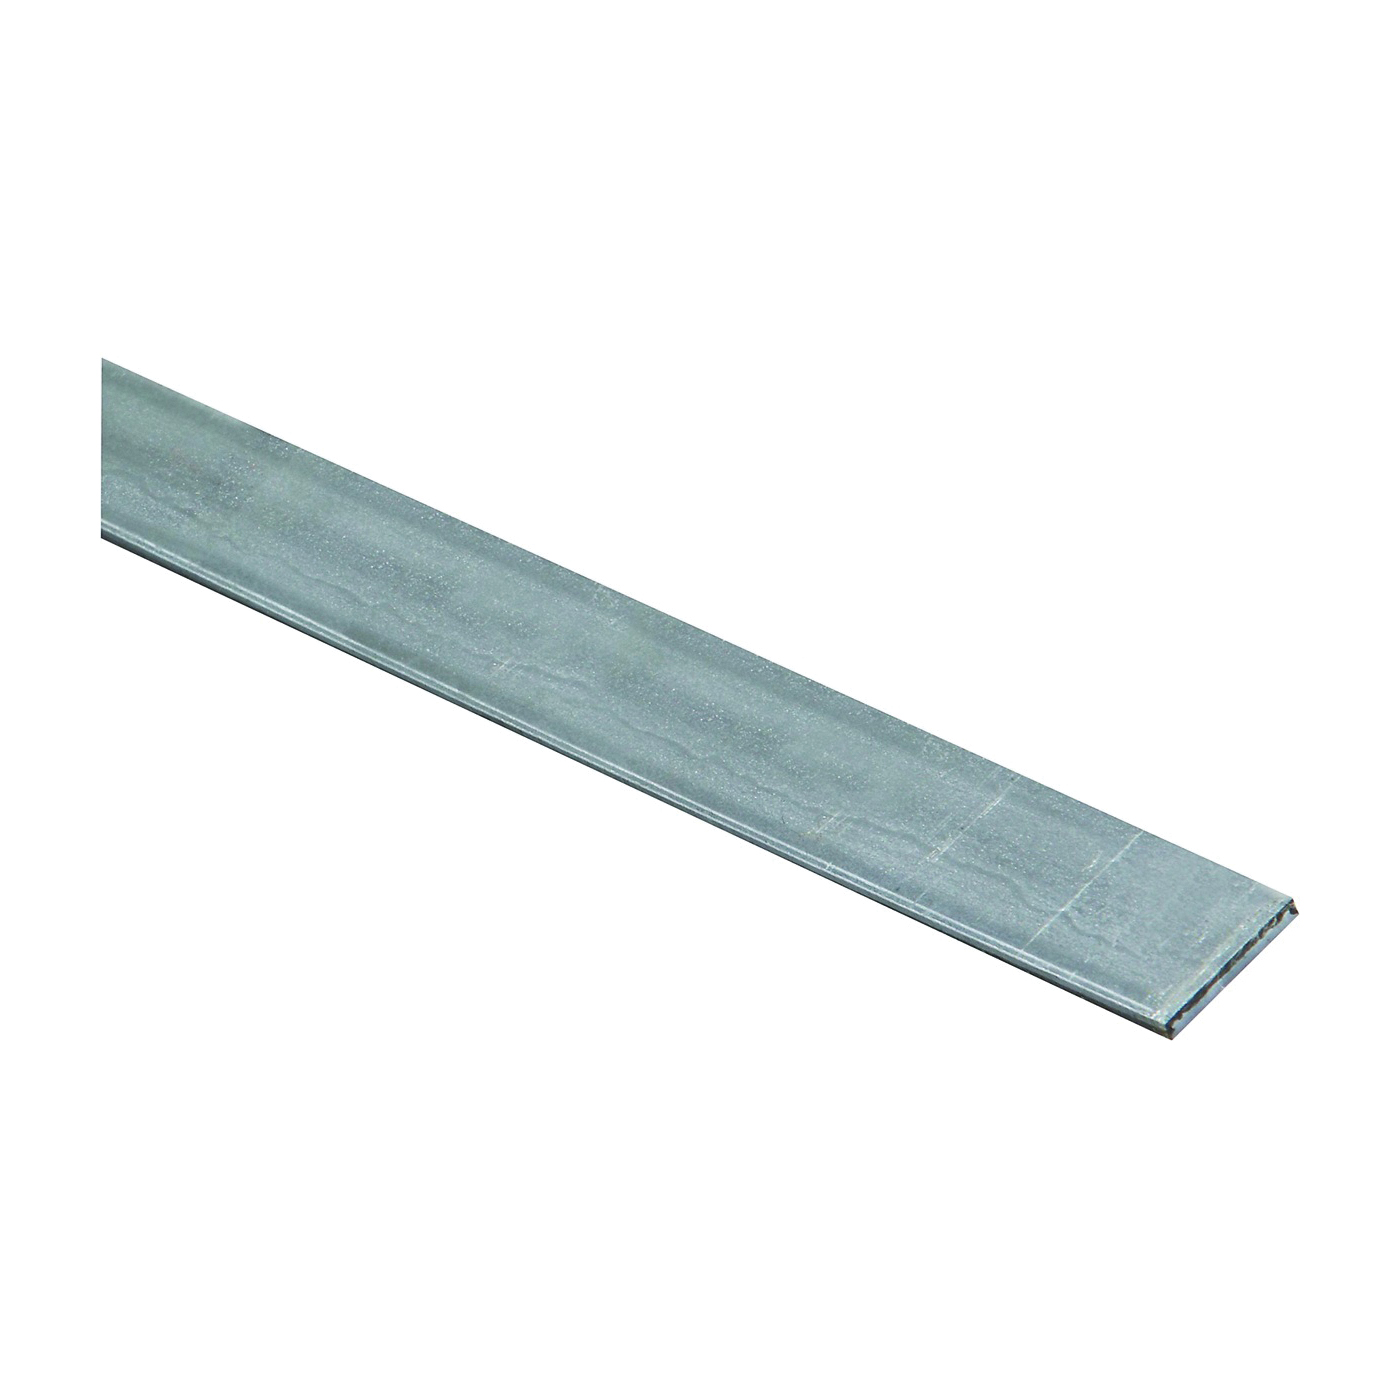 4015BC Series N180-000 Flat Stock, 3/4 in W, 72 in L, 0.12 in Thick, Steel, Galvanized, G40 Grade